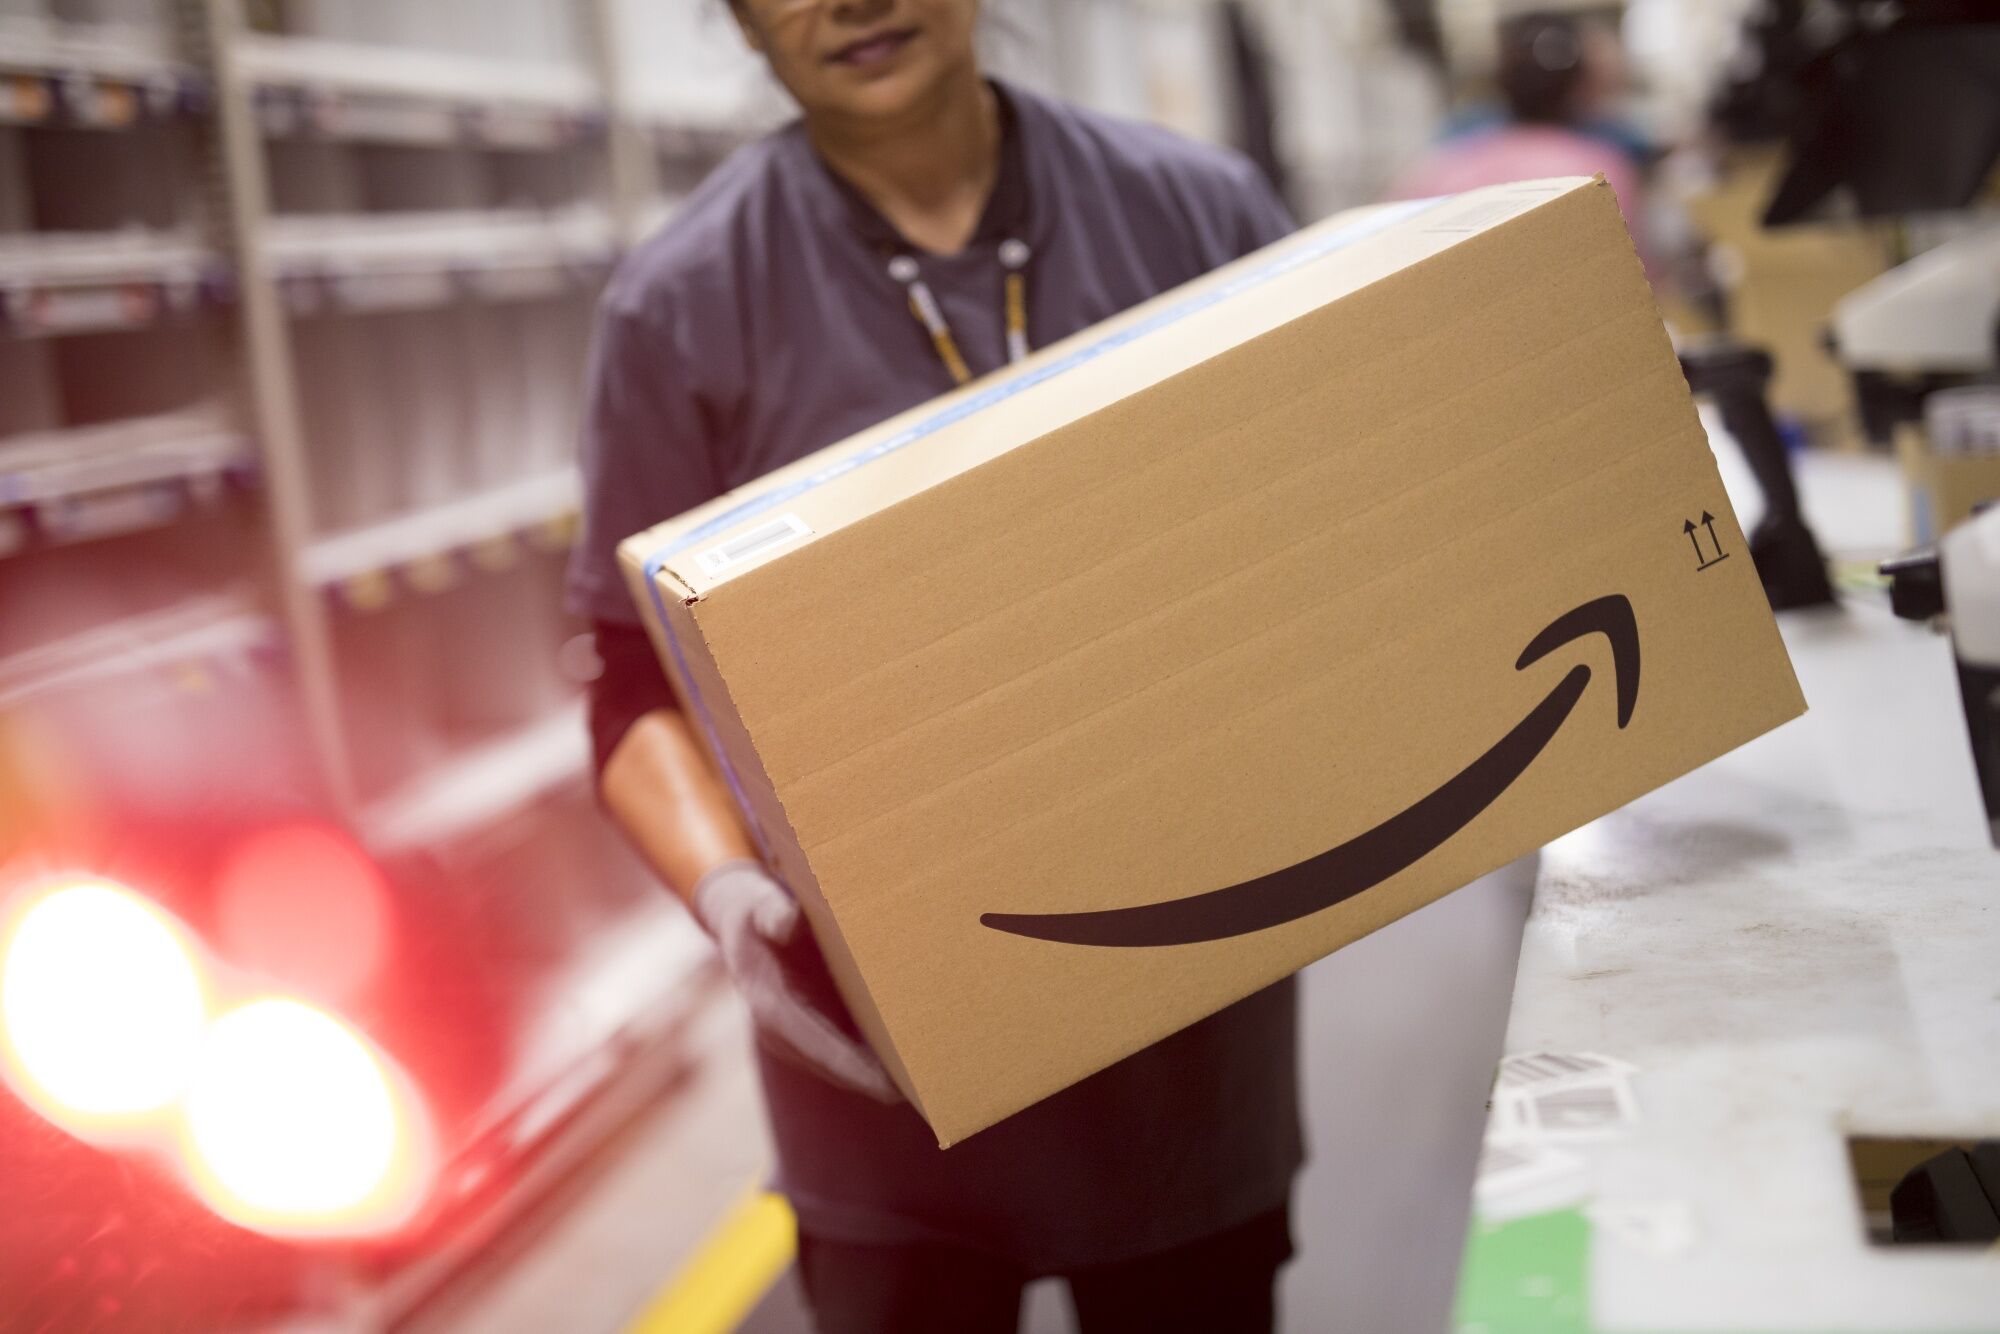 amazon, amazon prime memberships in us gain 8% to new high after lull